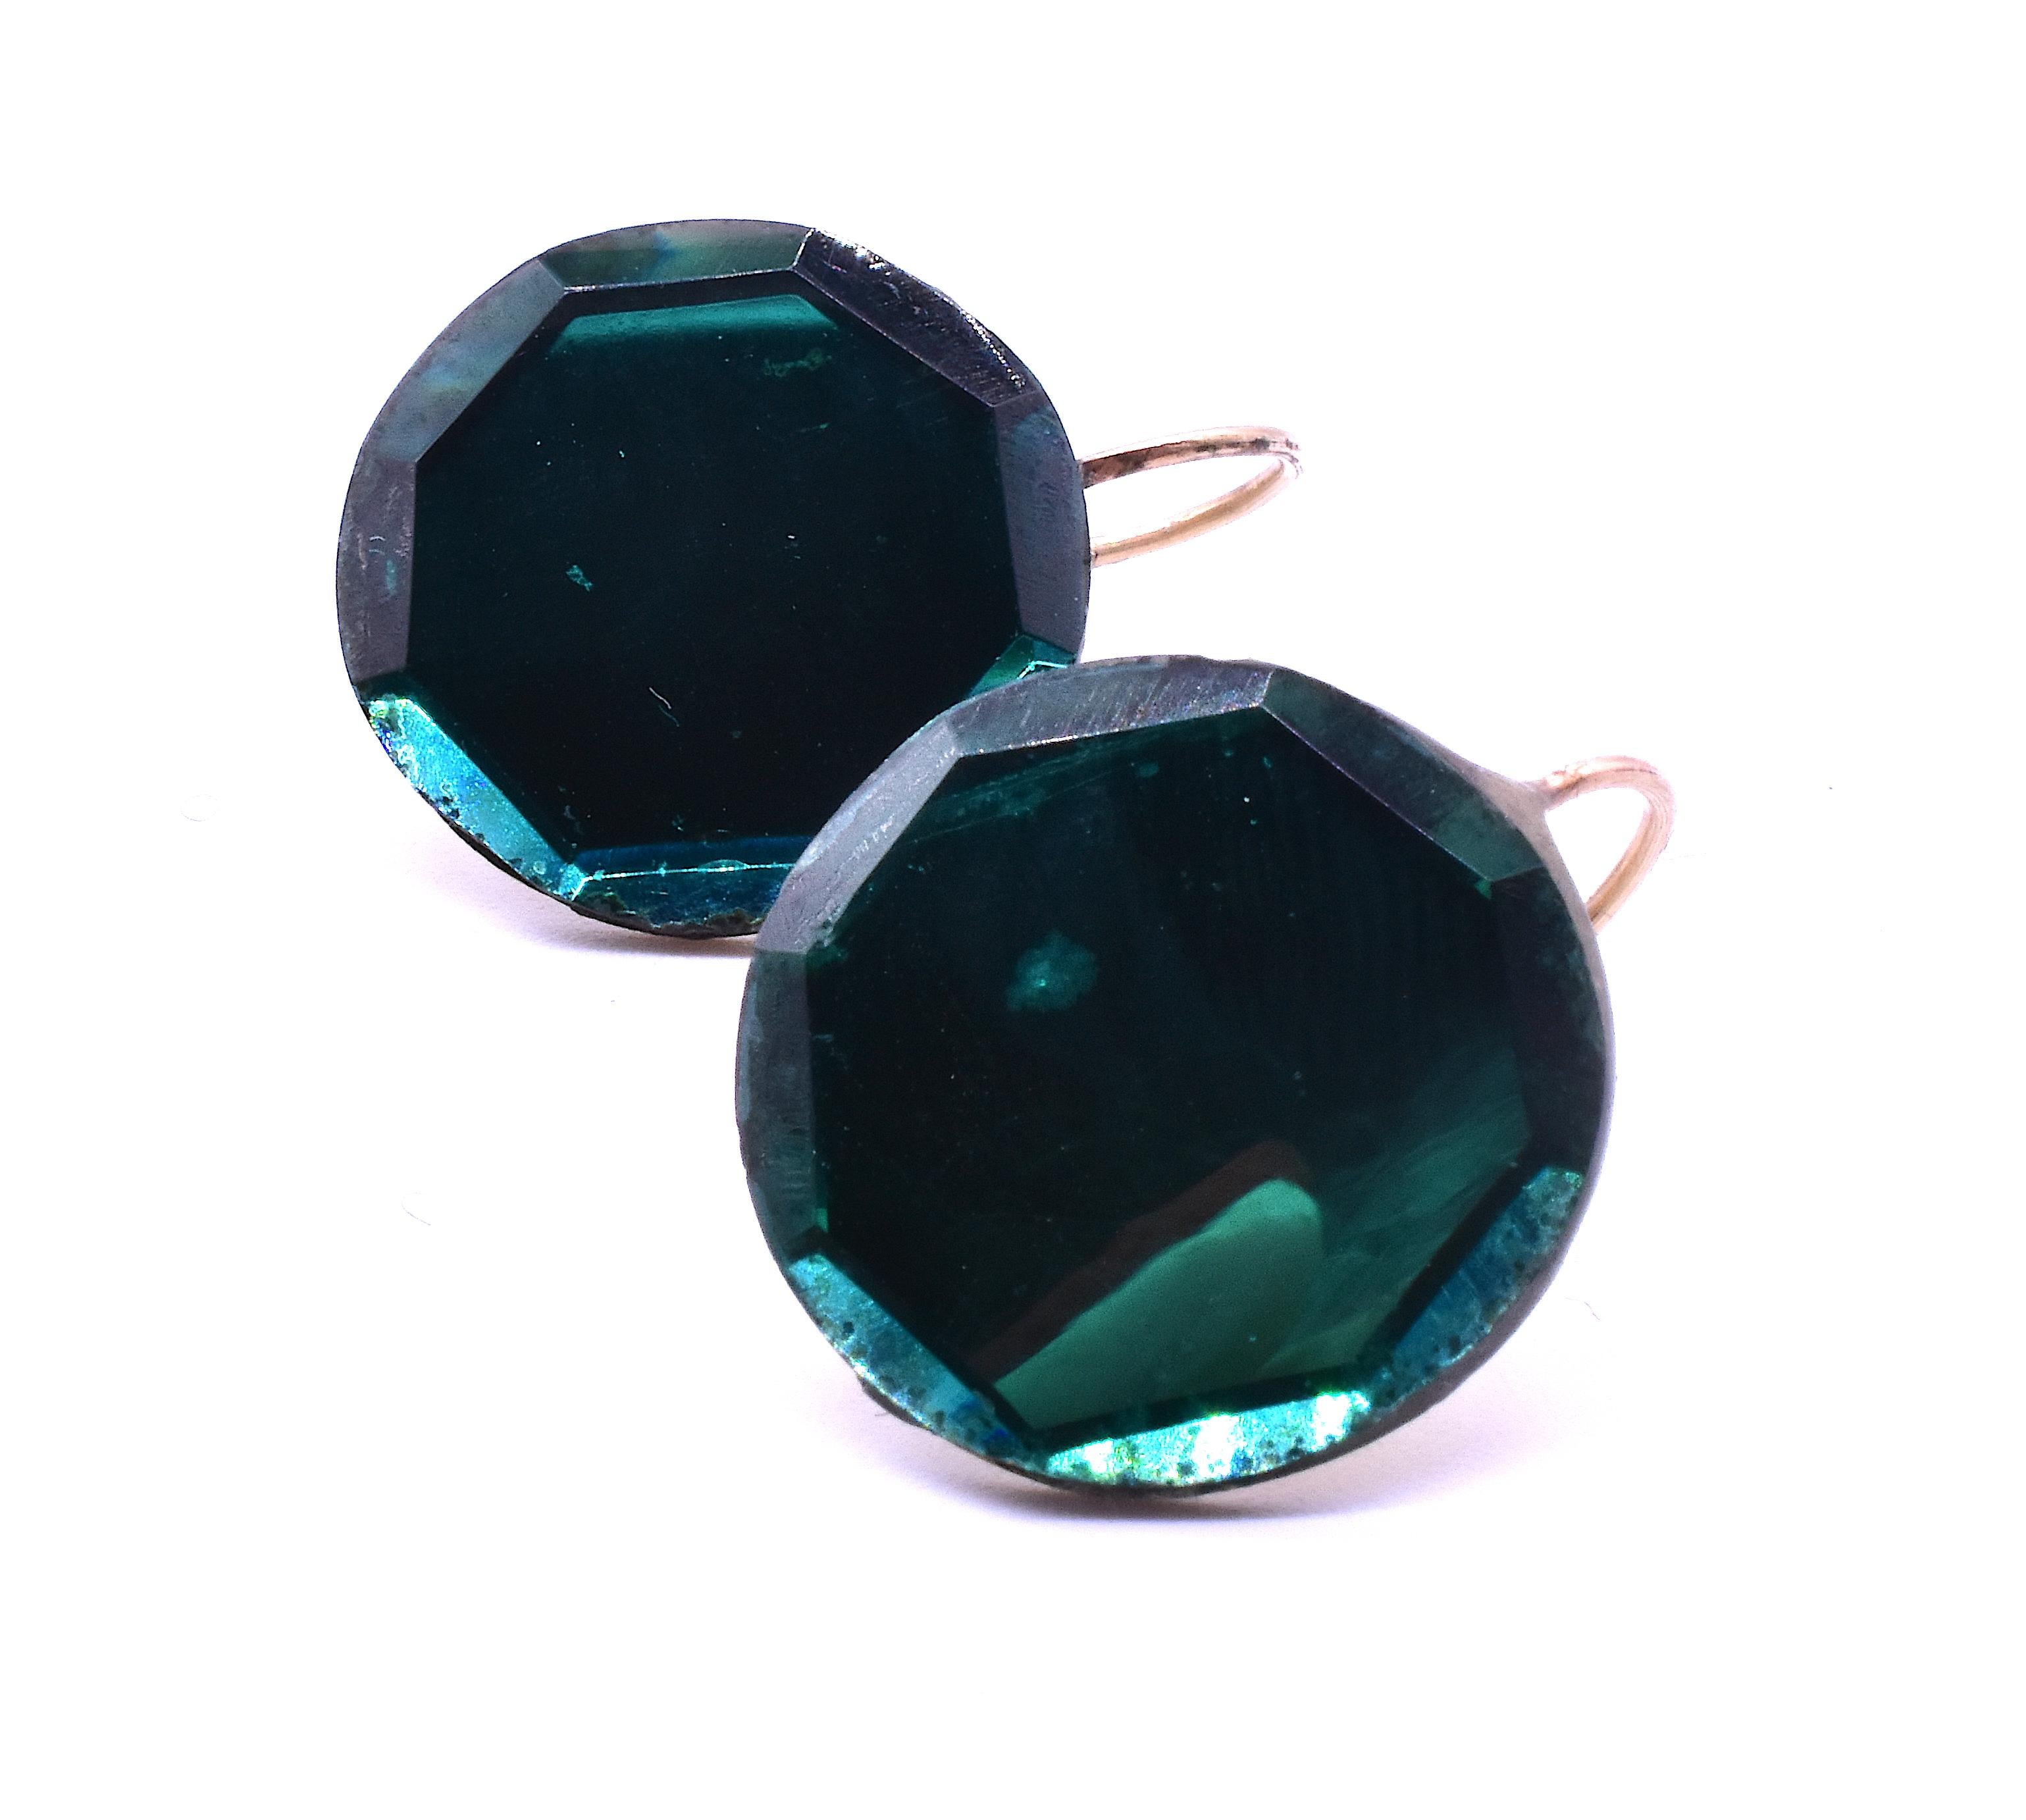 Lovely pair of Victorian Vauxhall glass teal mirror glass earrings set in metal with gold earwires. The Vauxhall glass Company manufactured mirror glass in the 19th century and in a burst of innovation one can only behold with astonishment today,